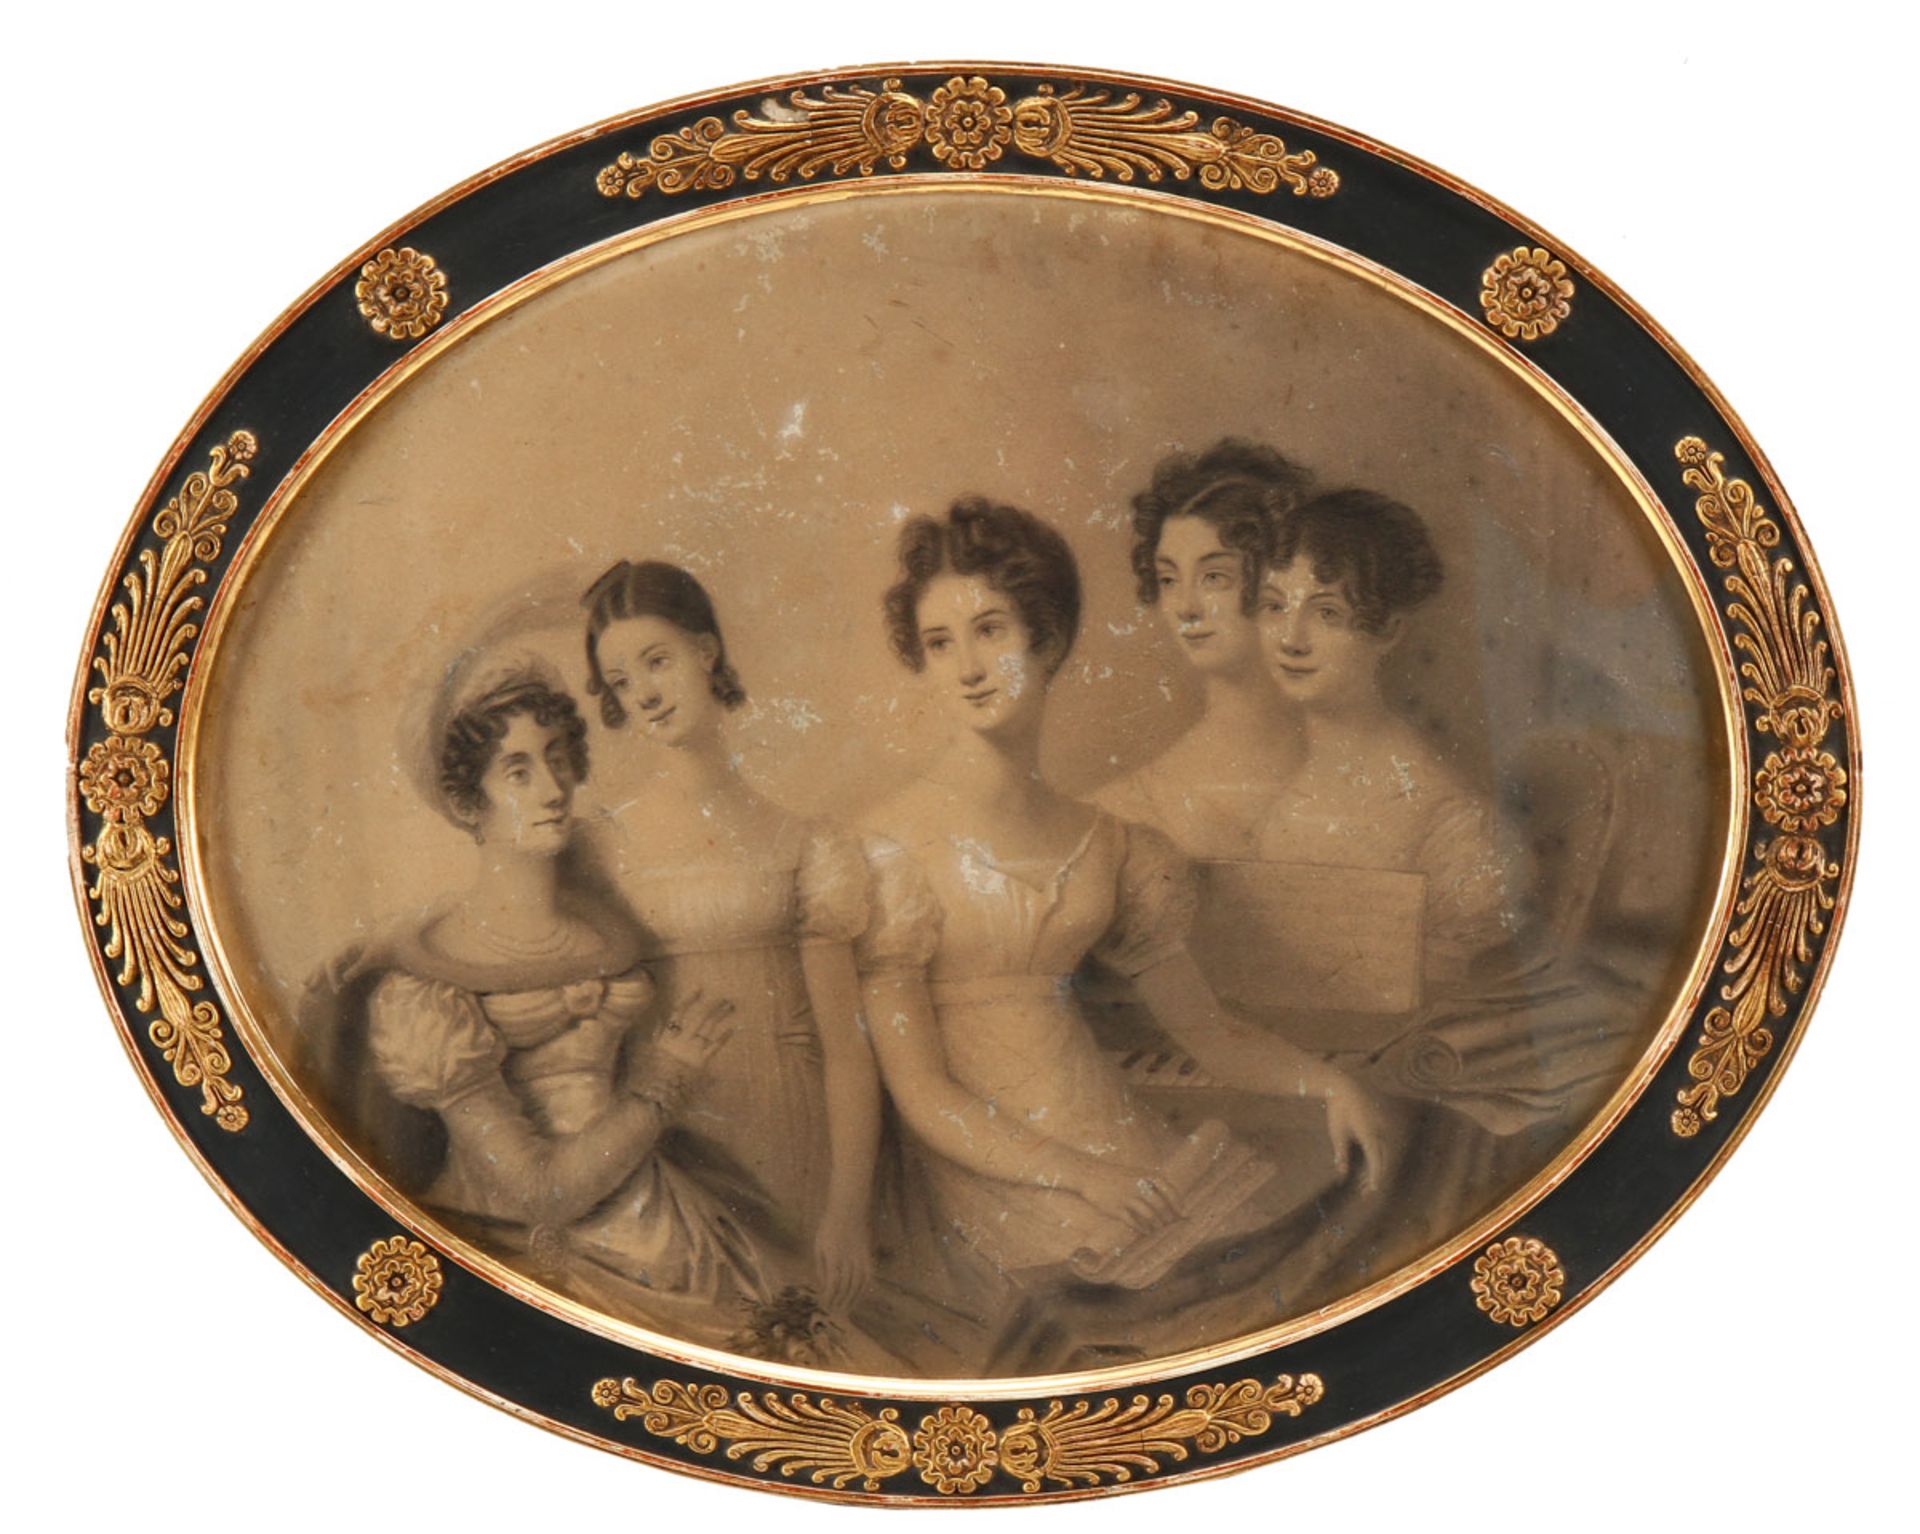 FRENCH SCHOOL (19TH CENTURY), FAMILY SCENE Grisaille pastel on paper, with a rich oval frame in